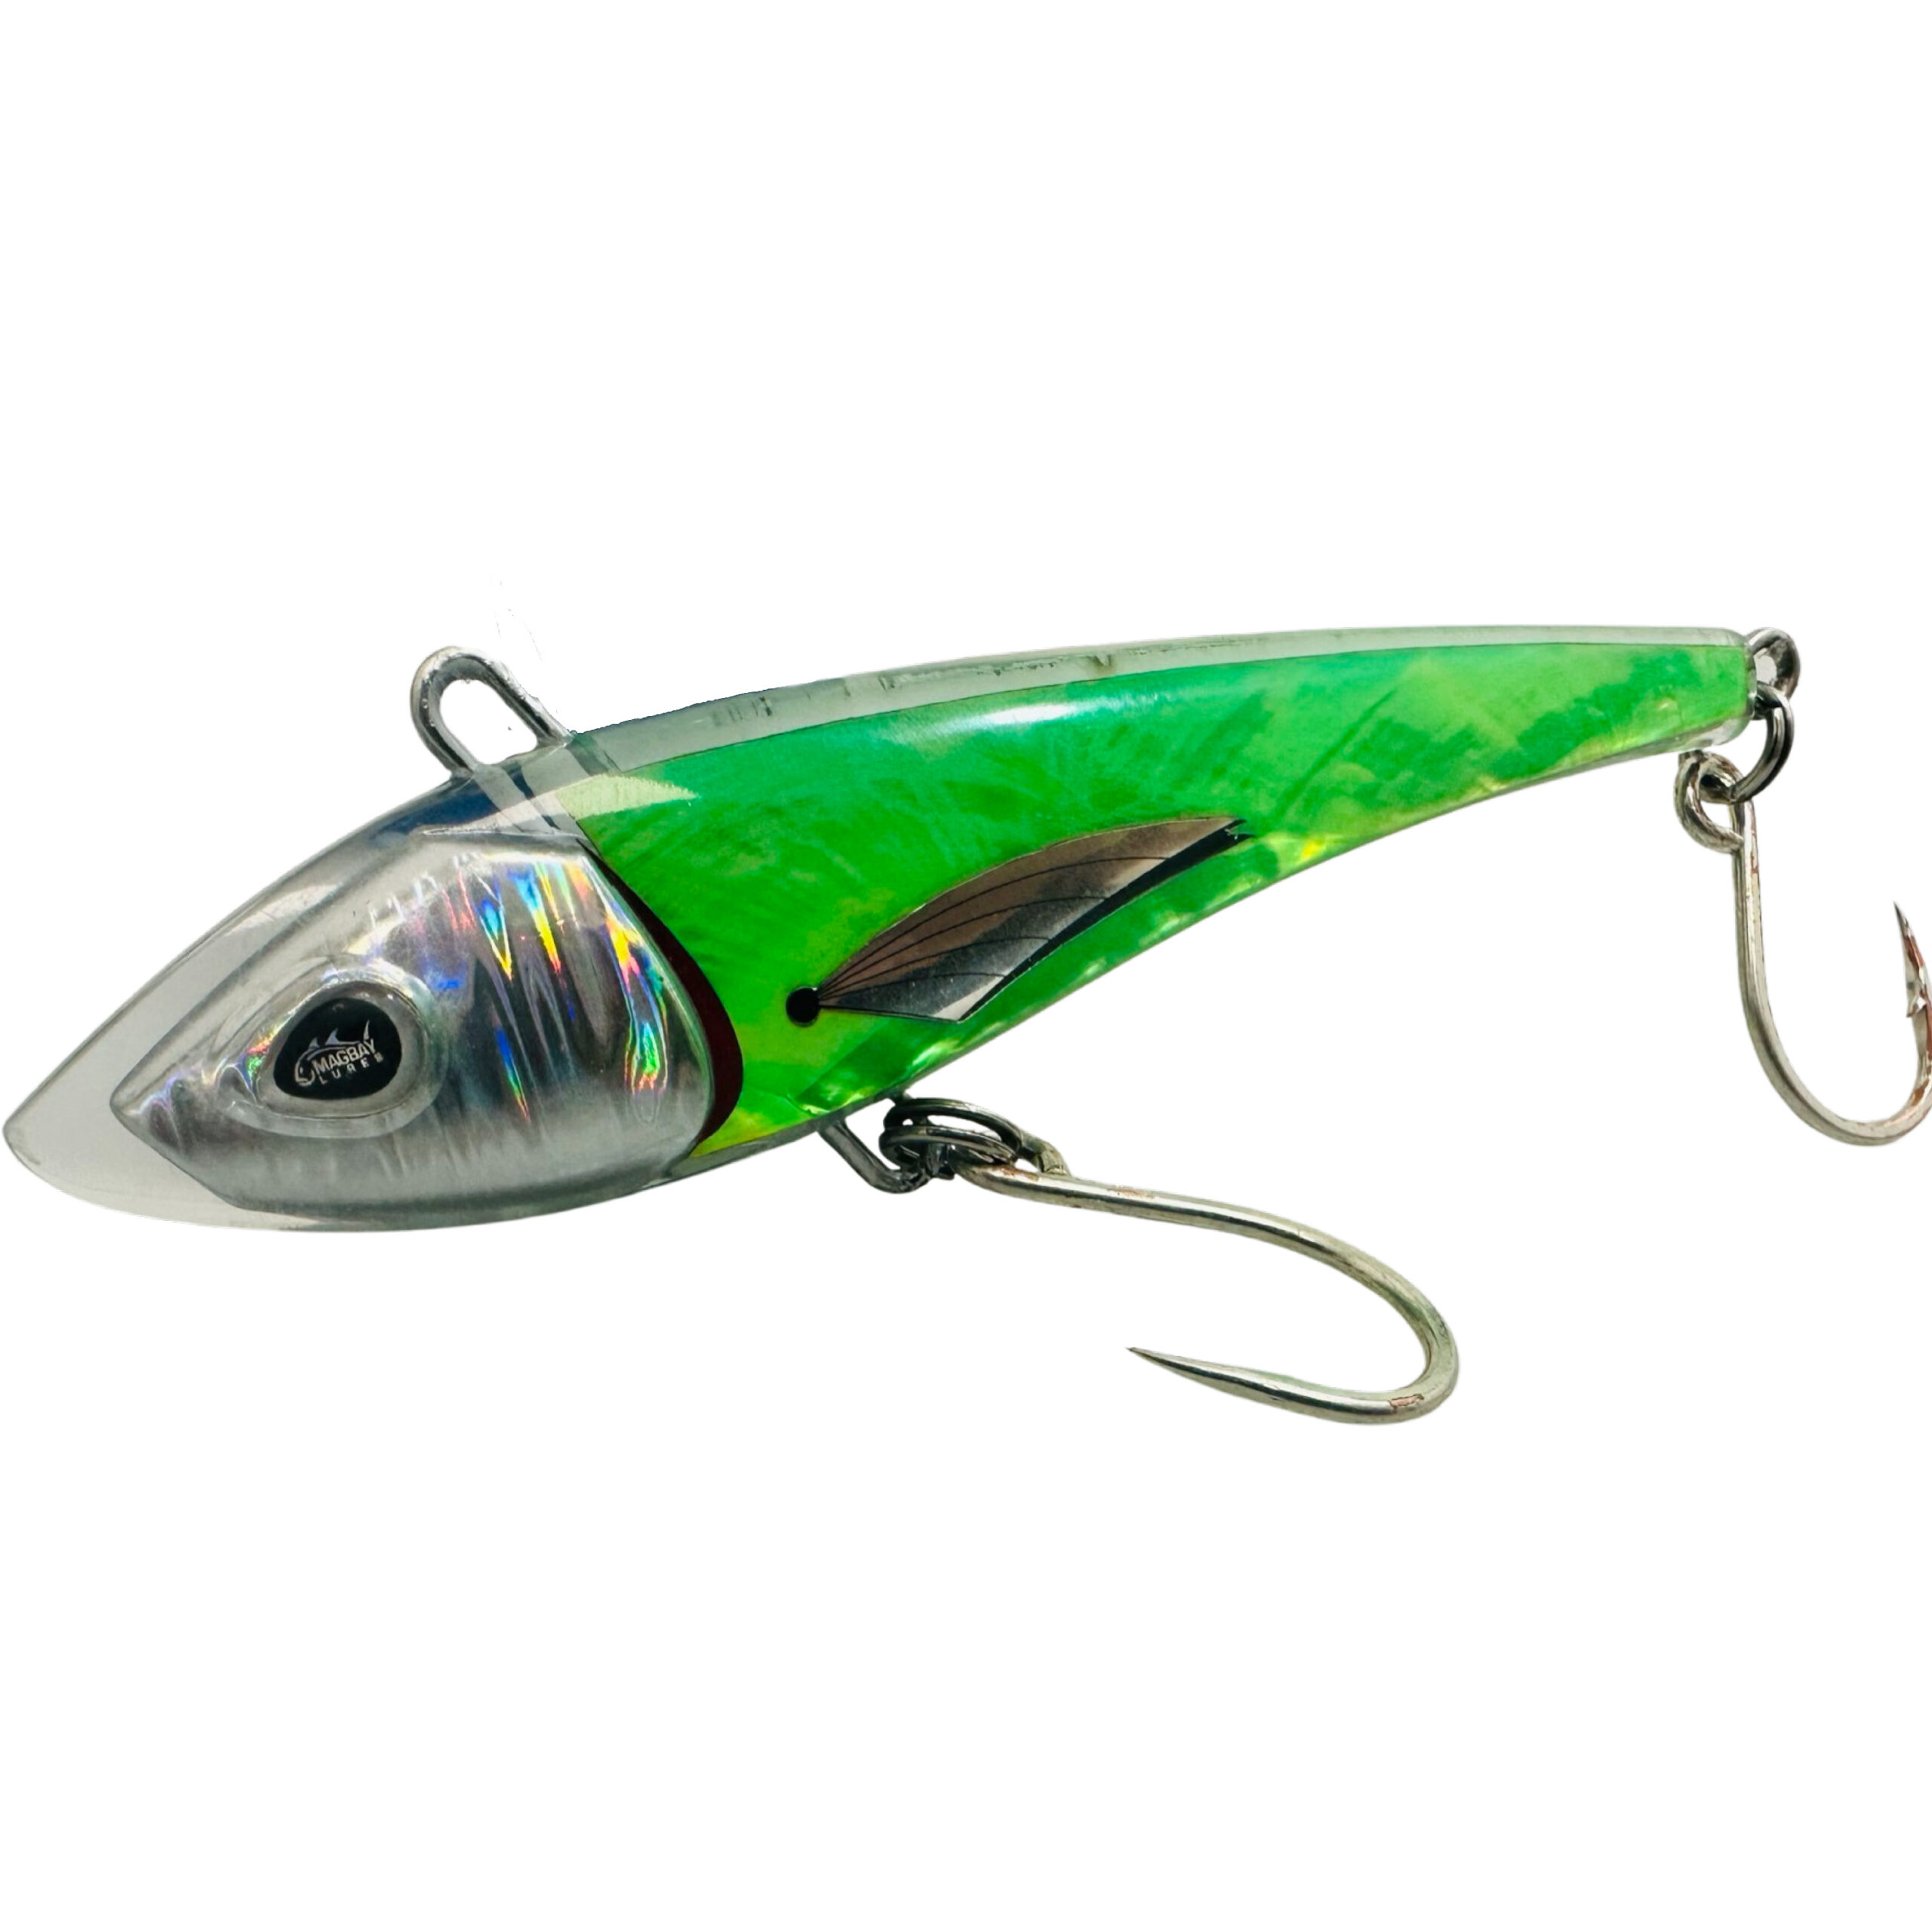 RM5 Solid Resin Abalone 5 Inch UV Minnow Lure - MagBay Lures - Wahoo and  Marlin Fishing Lures